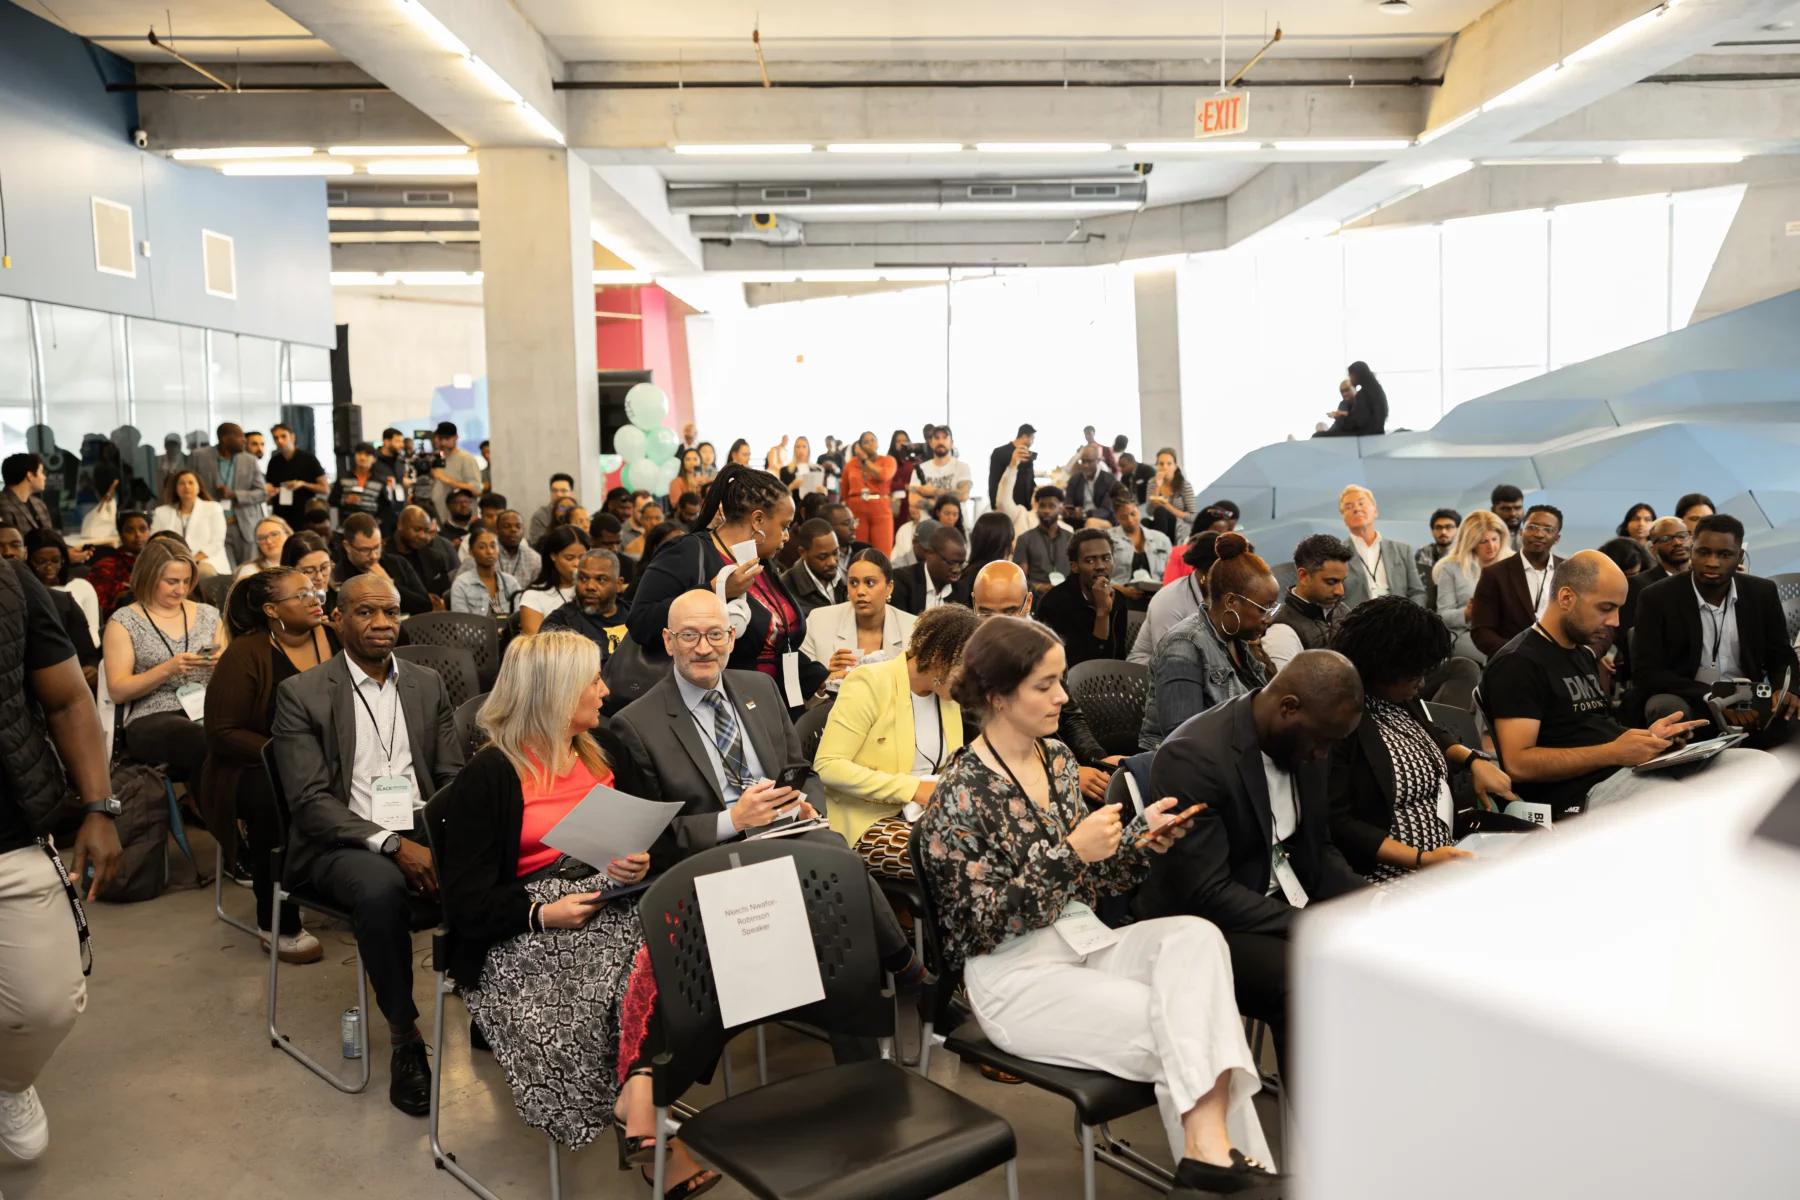 On Tuesday, DMZ held its fourth annual Black Innovation Summit, a competition for Black tech entrepreneurs to pitch their startup ideas in hopes of winning grants towards their businesses. (Courtesy: DMZ) 